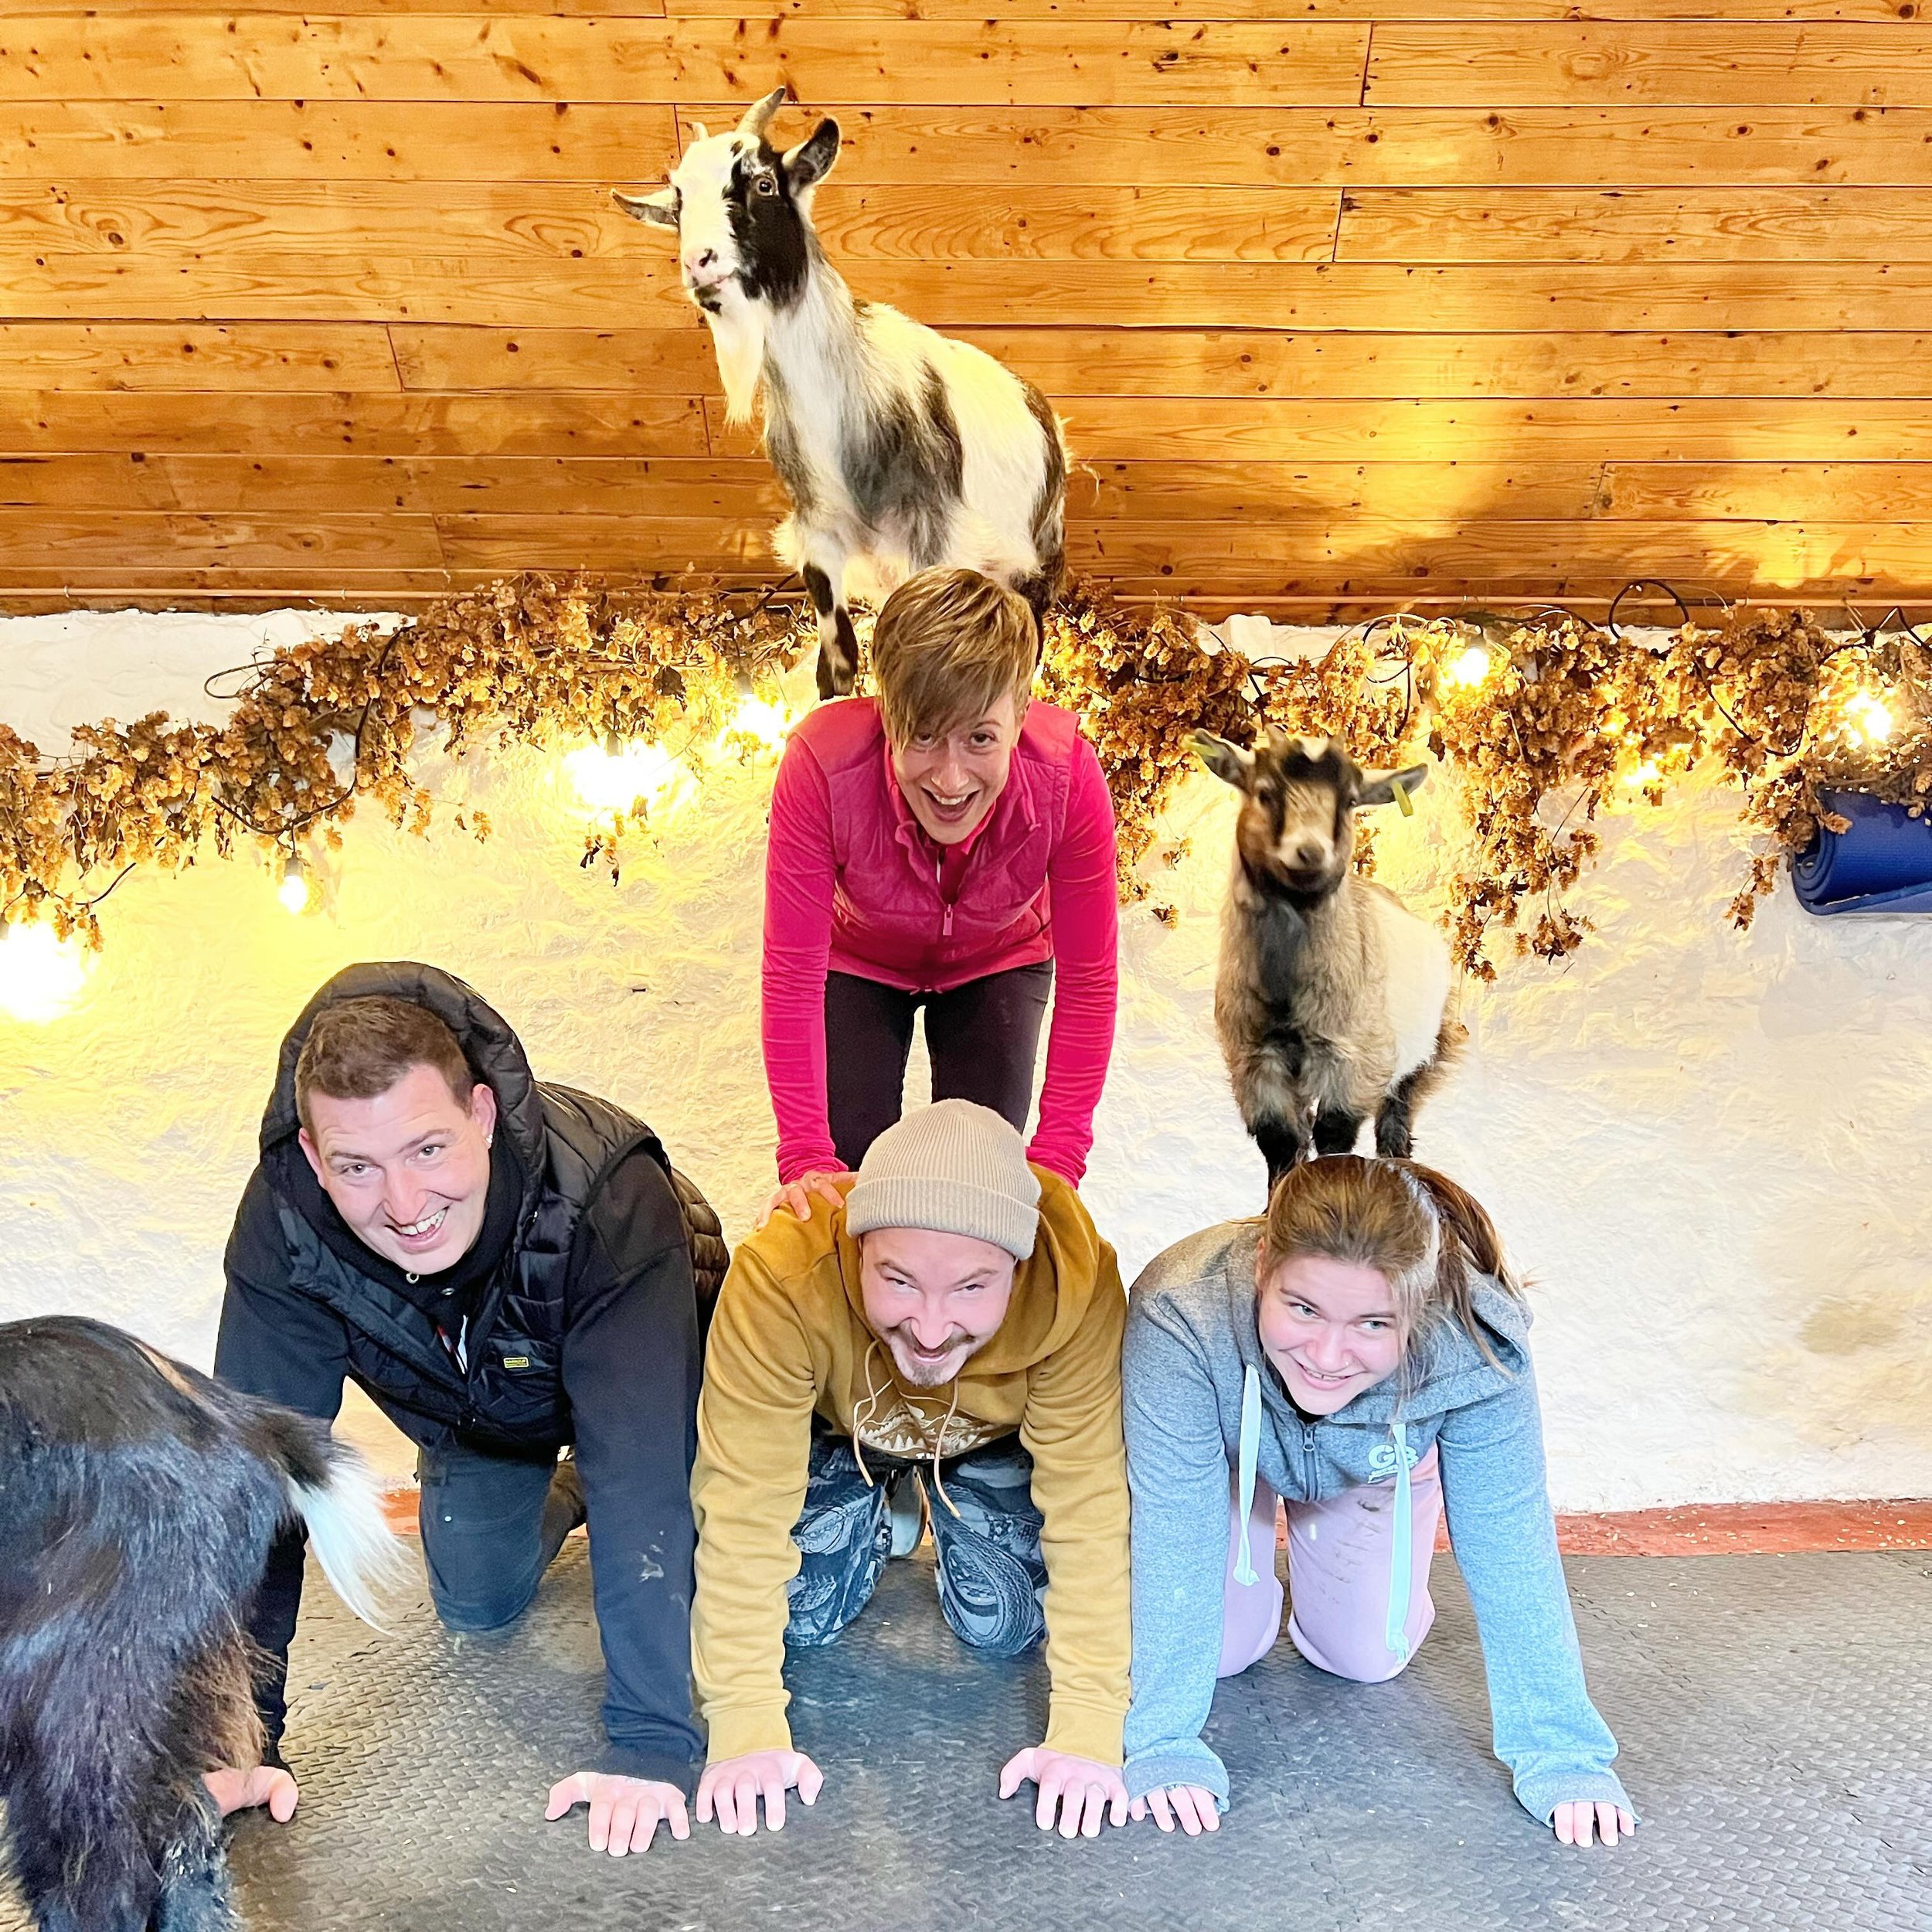 Join us March 3rd and 17th, tickets are selling fast! @thepilatesattic 

#goats #pygmygoats #goatpilates #pygmygoatpilates #pilates #goatyoga #scotland #edinburgh #fife #goatsofinstagram #babygoats